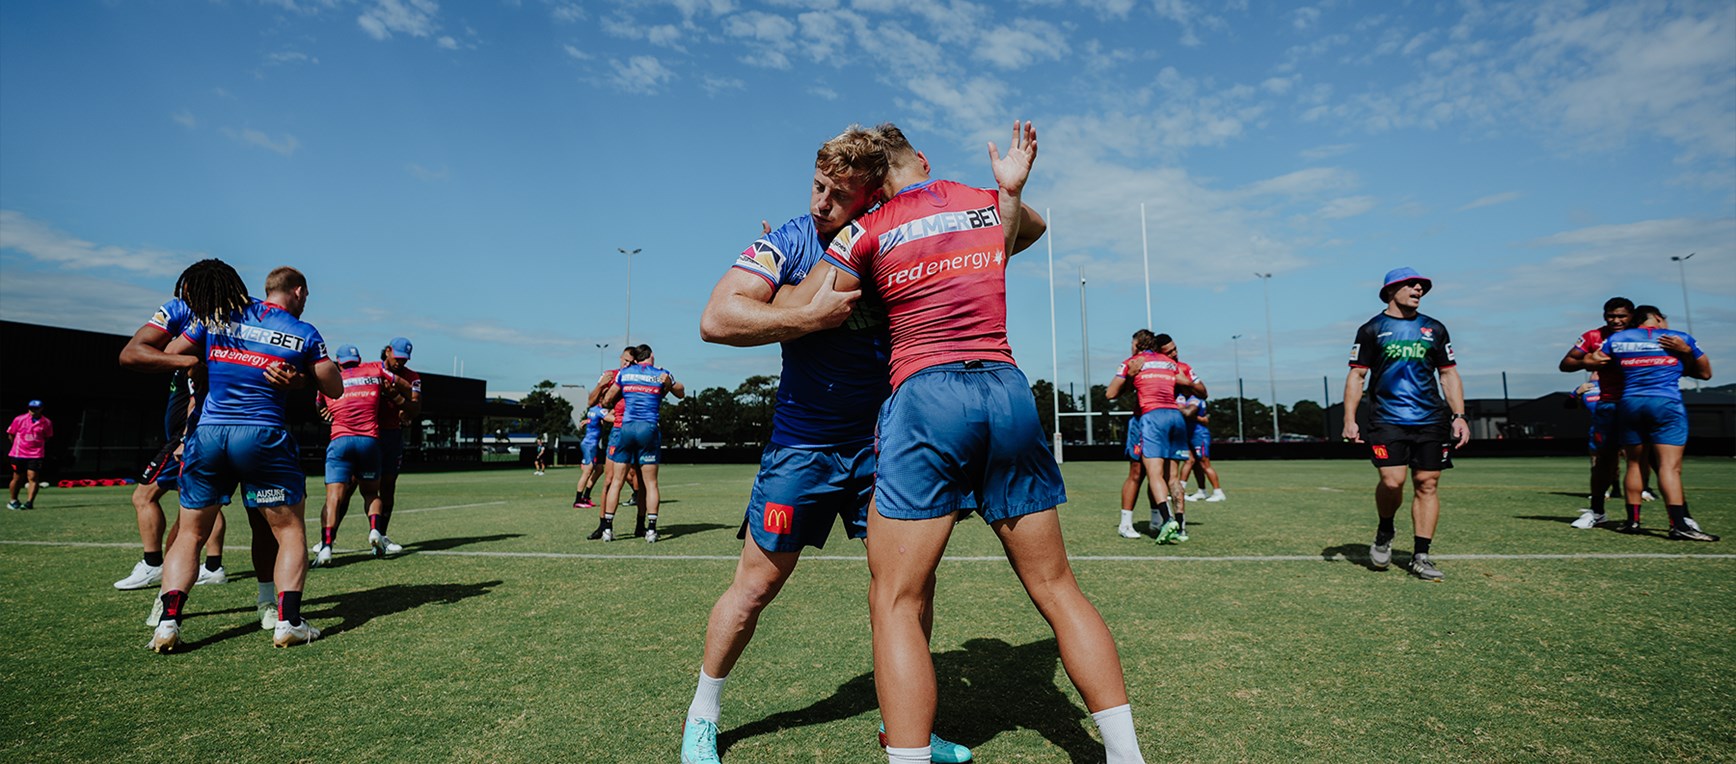 Gallery: Preparations for Manly battle